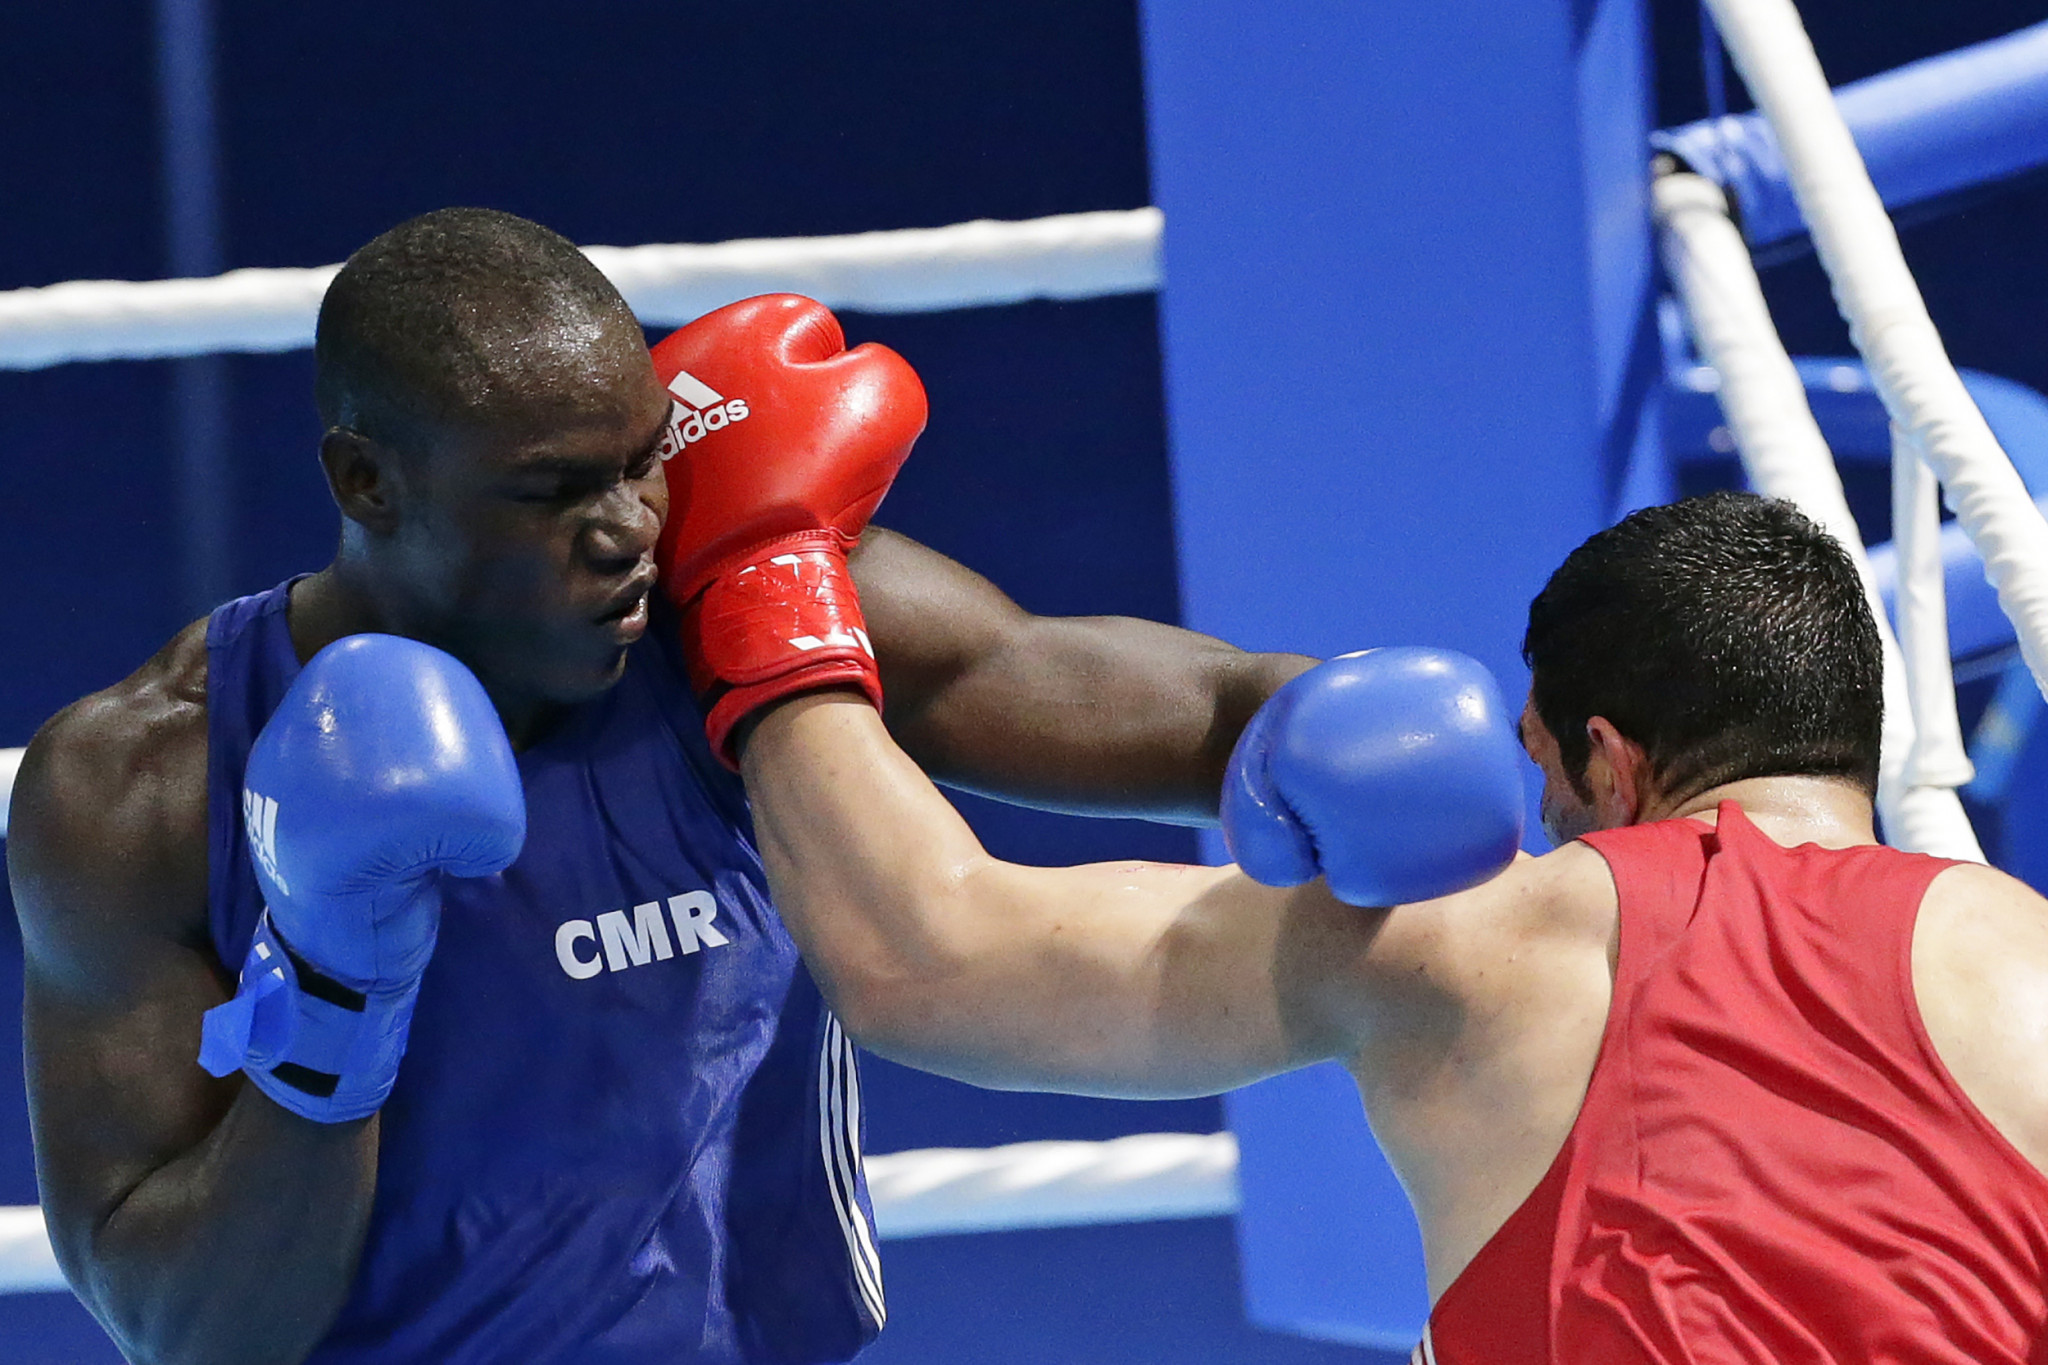 Cameroon's Arsene Fosso was a World Championship bronze medallist in 2017 but was knocked out in the quarter-finals of last year's Commonwealth Games in the Gold Coast ©Getty Images